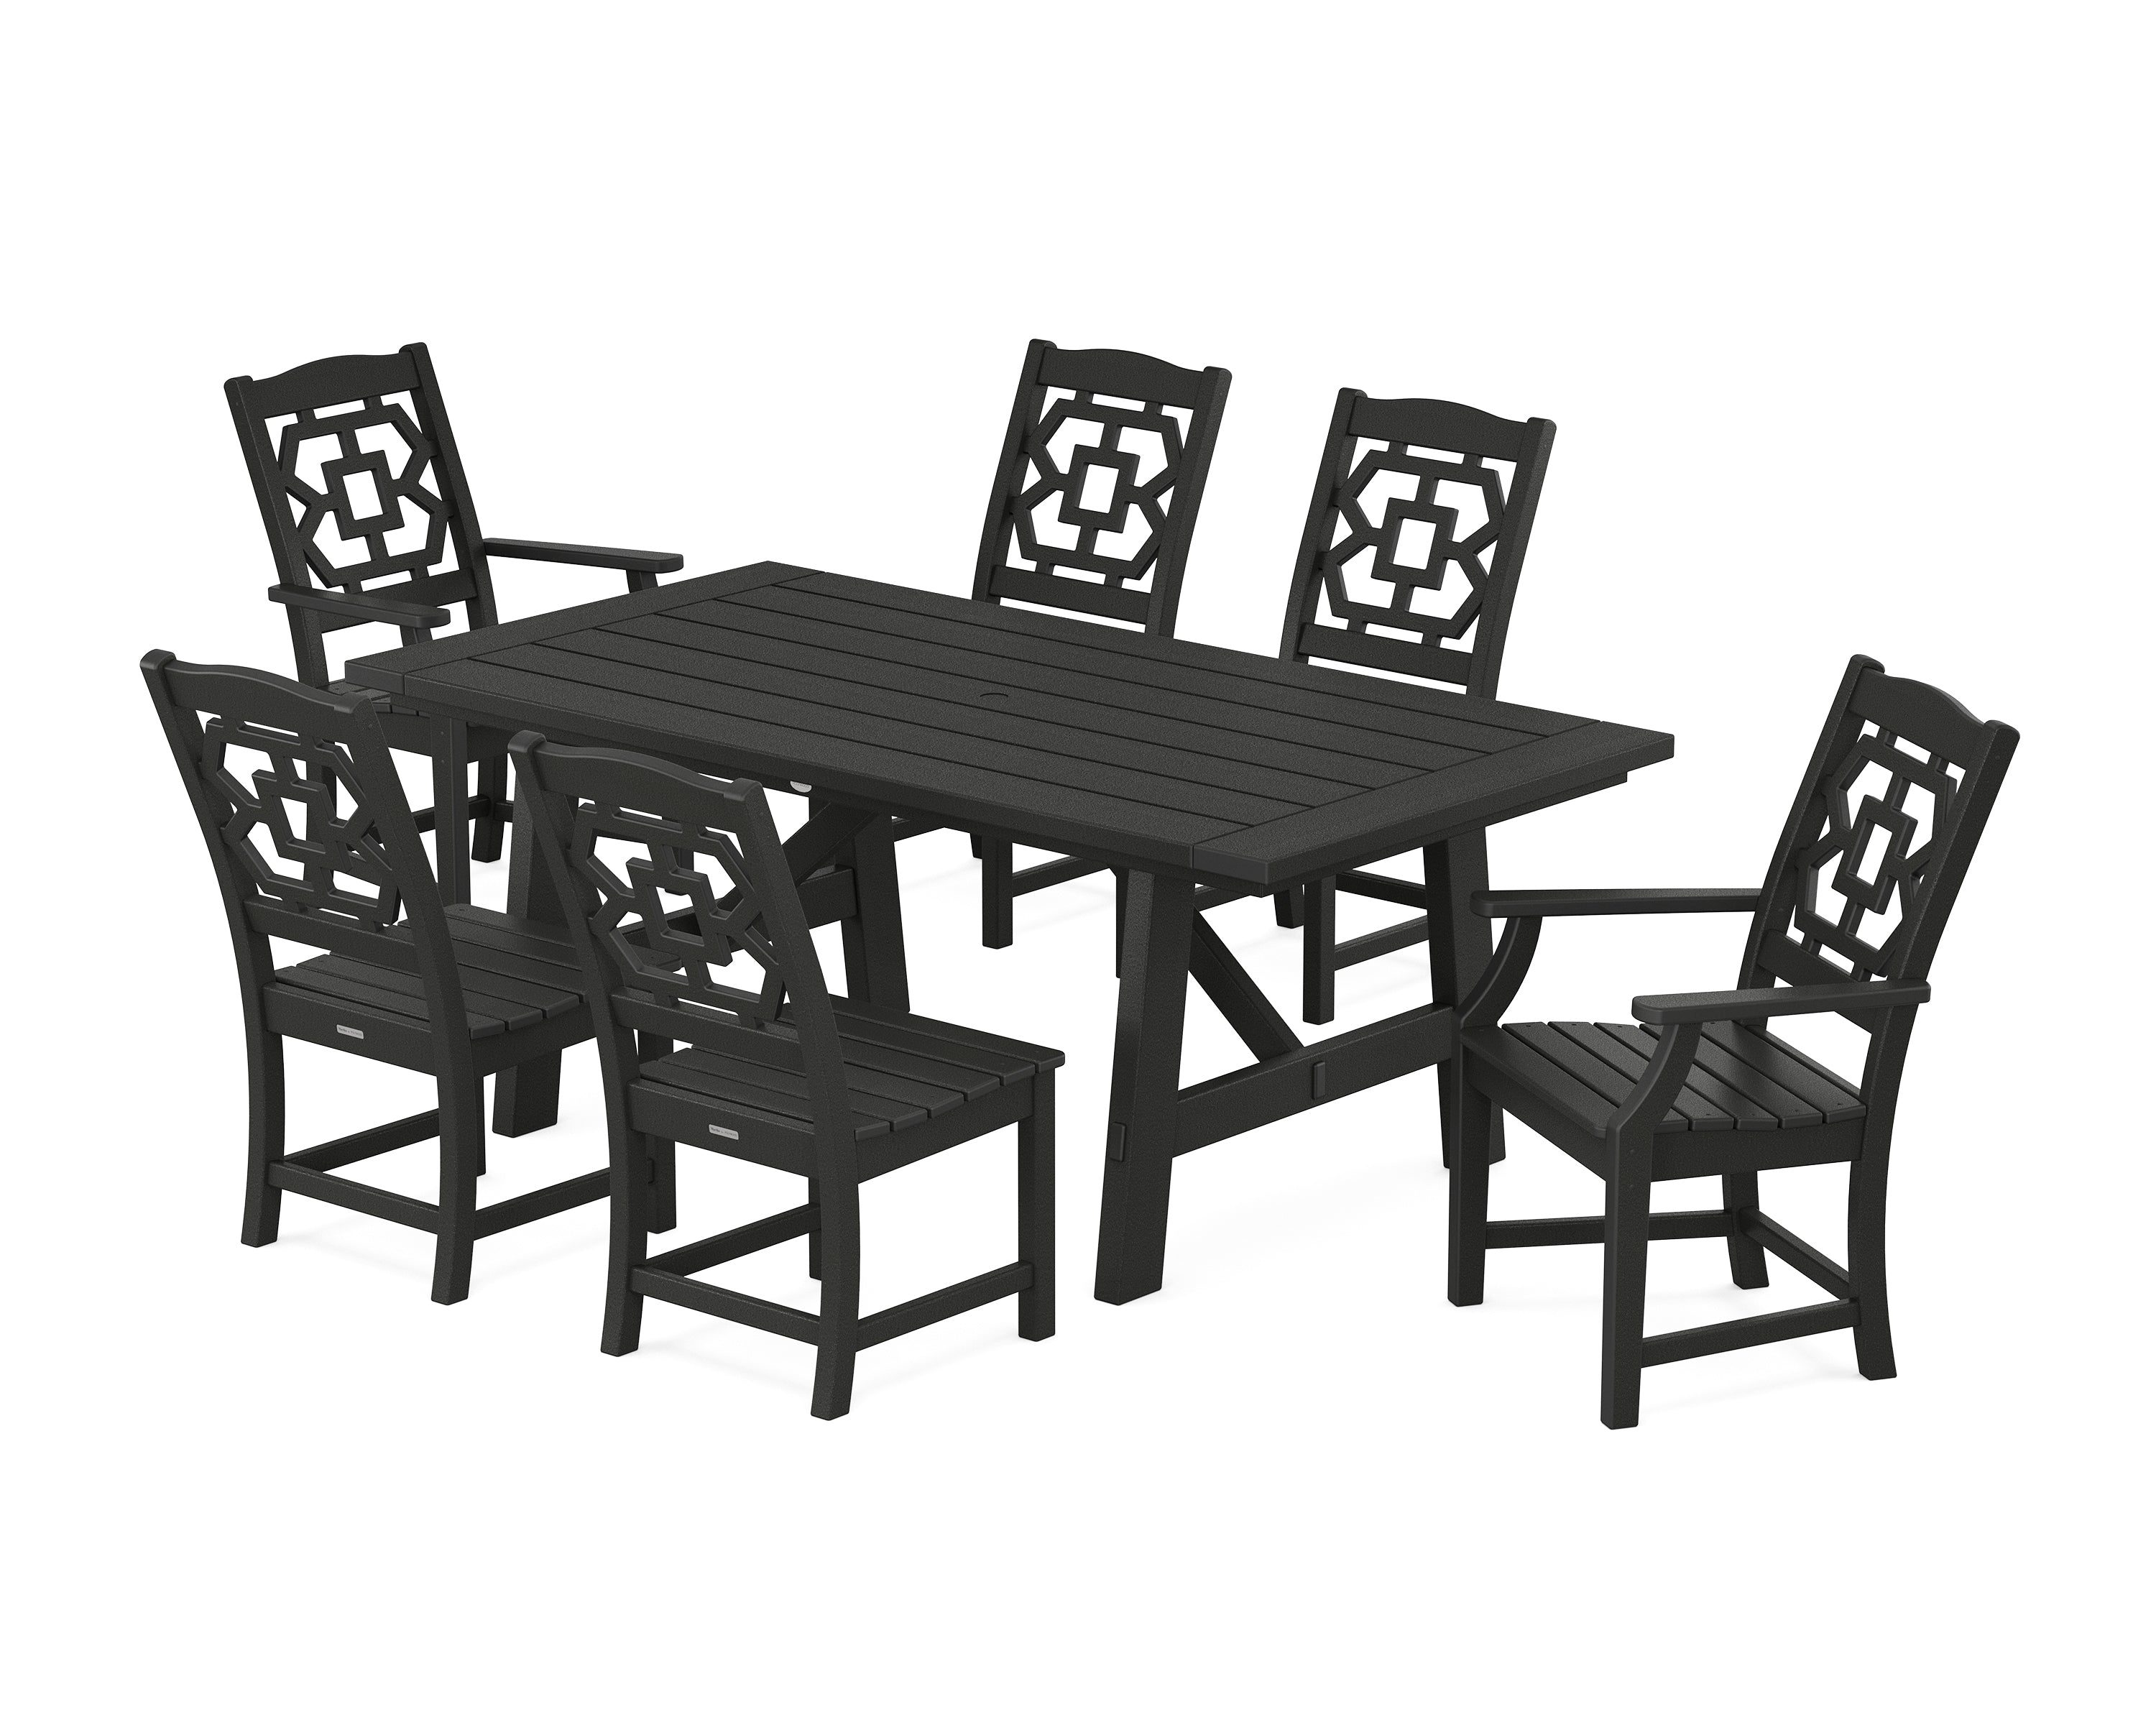 Martha Stewart by POLYWOOD® Chinoiserie 7-Piece Rustic Farmhouse Dining Set in Black